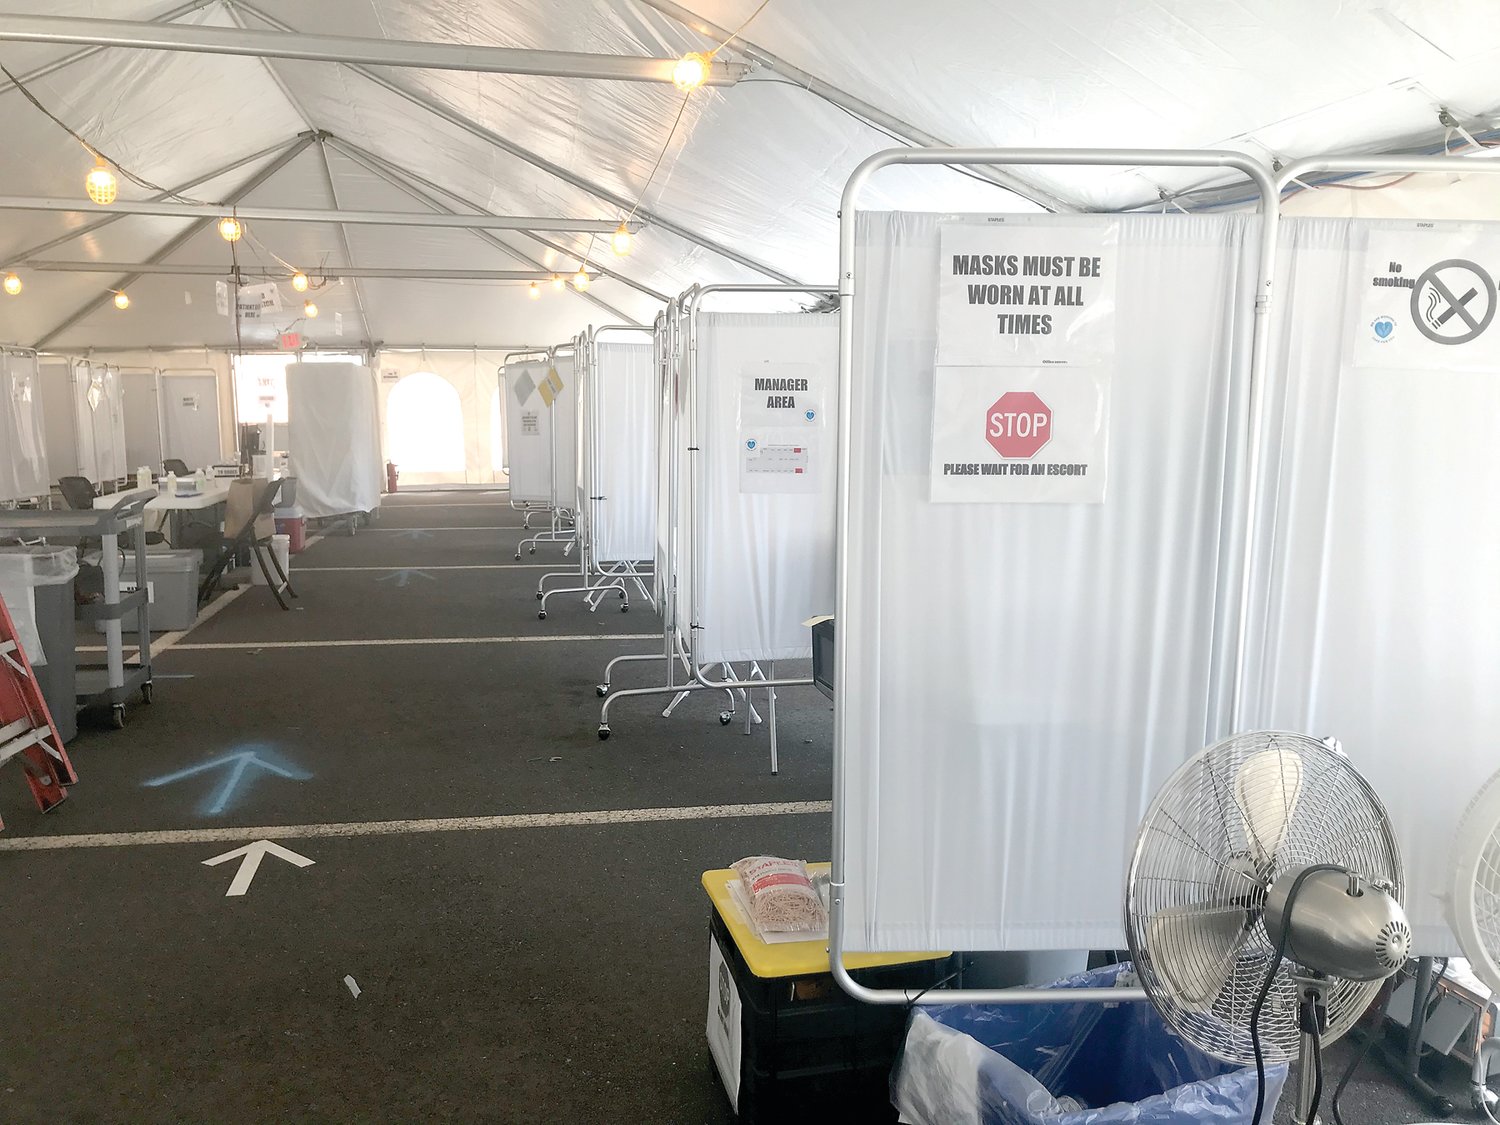 The Respiratory Illness Tent stationed directly behind Hunterdon Medical Center.